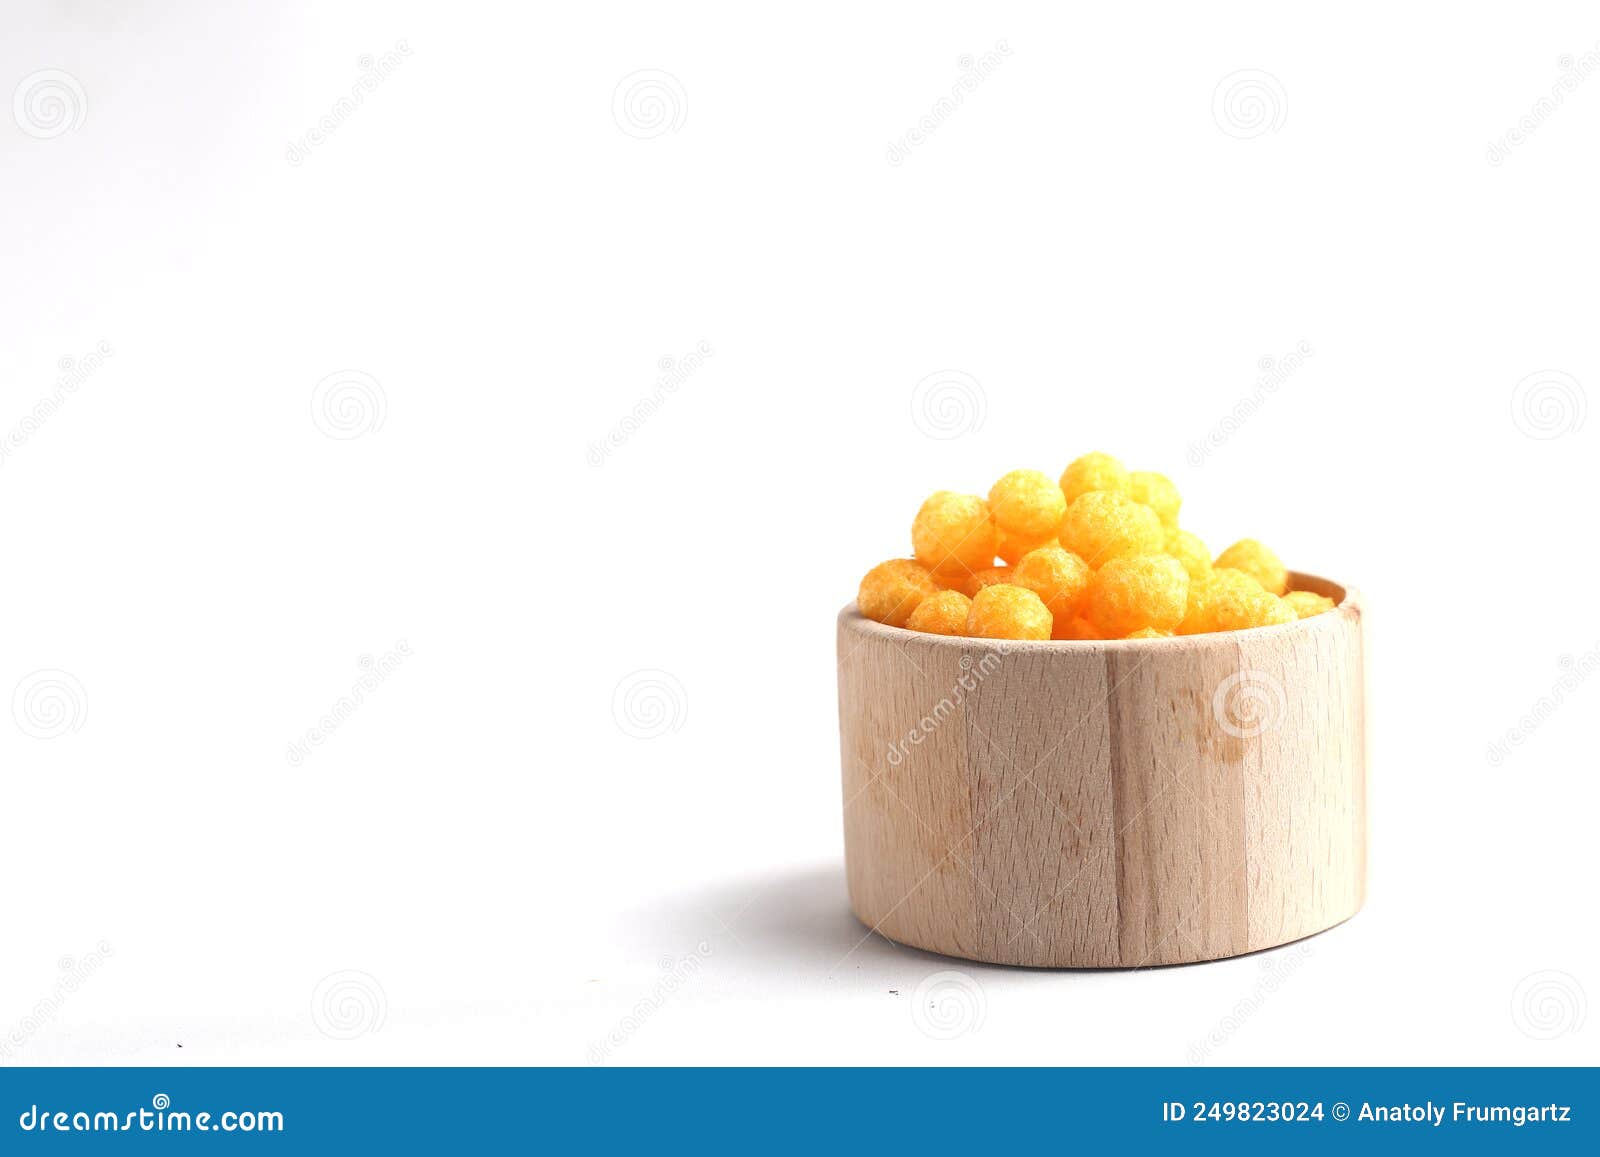 Puffed Ball Cheese Corn Chips In Gray Bowl And Sprinkled Isolated On White  Background Stock Photo - Download Image Now - iStock